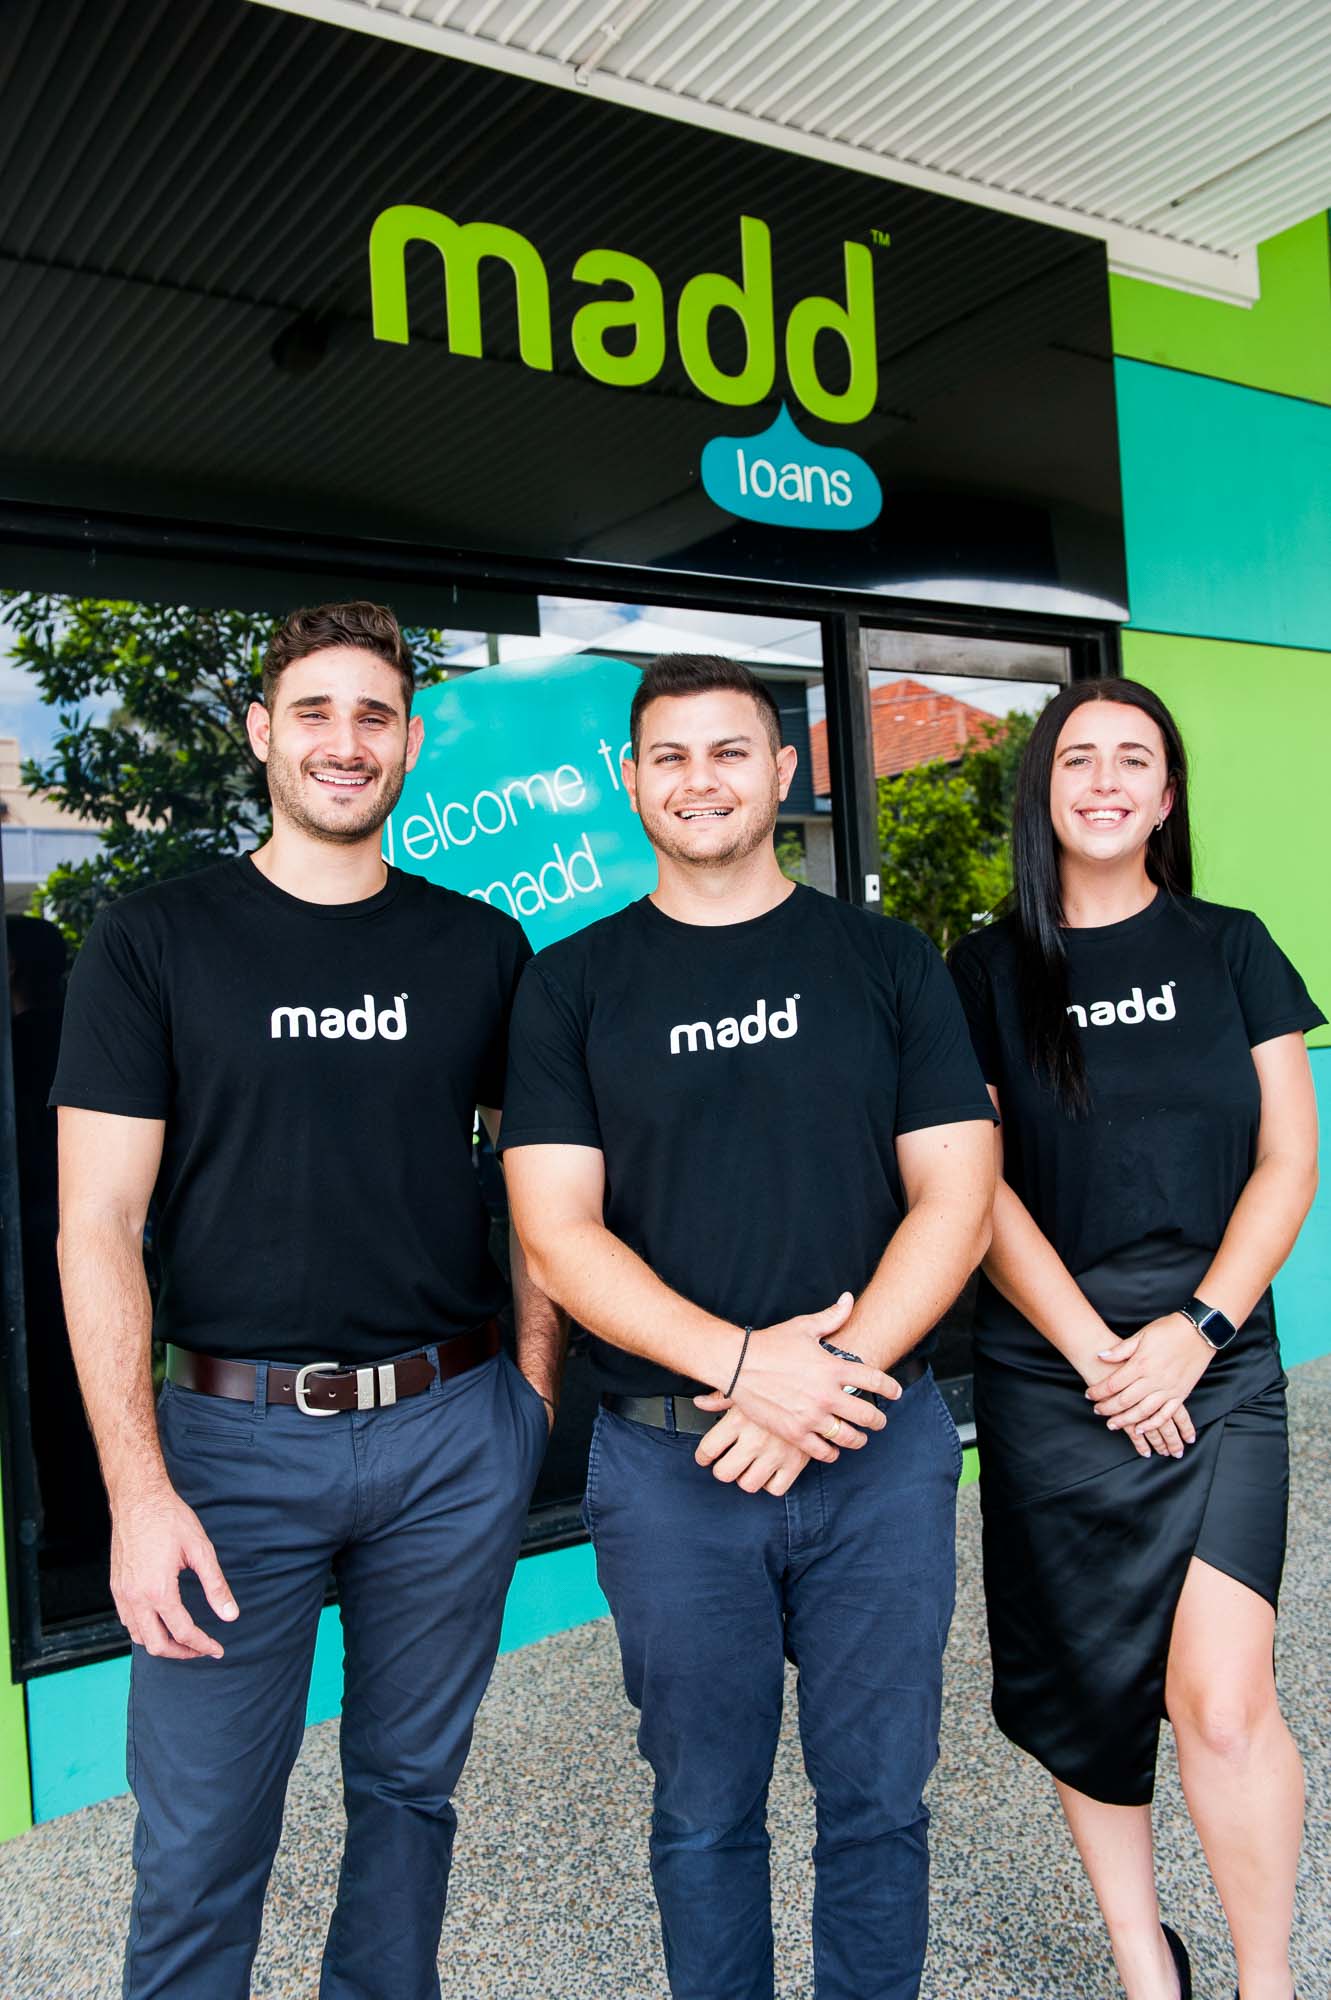 Dedicated Madd Loans staff ready to assist with financial hardship solutions, standing outside their welcoming office.